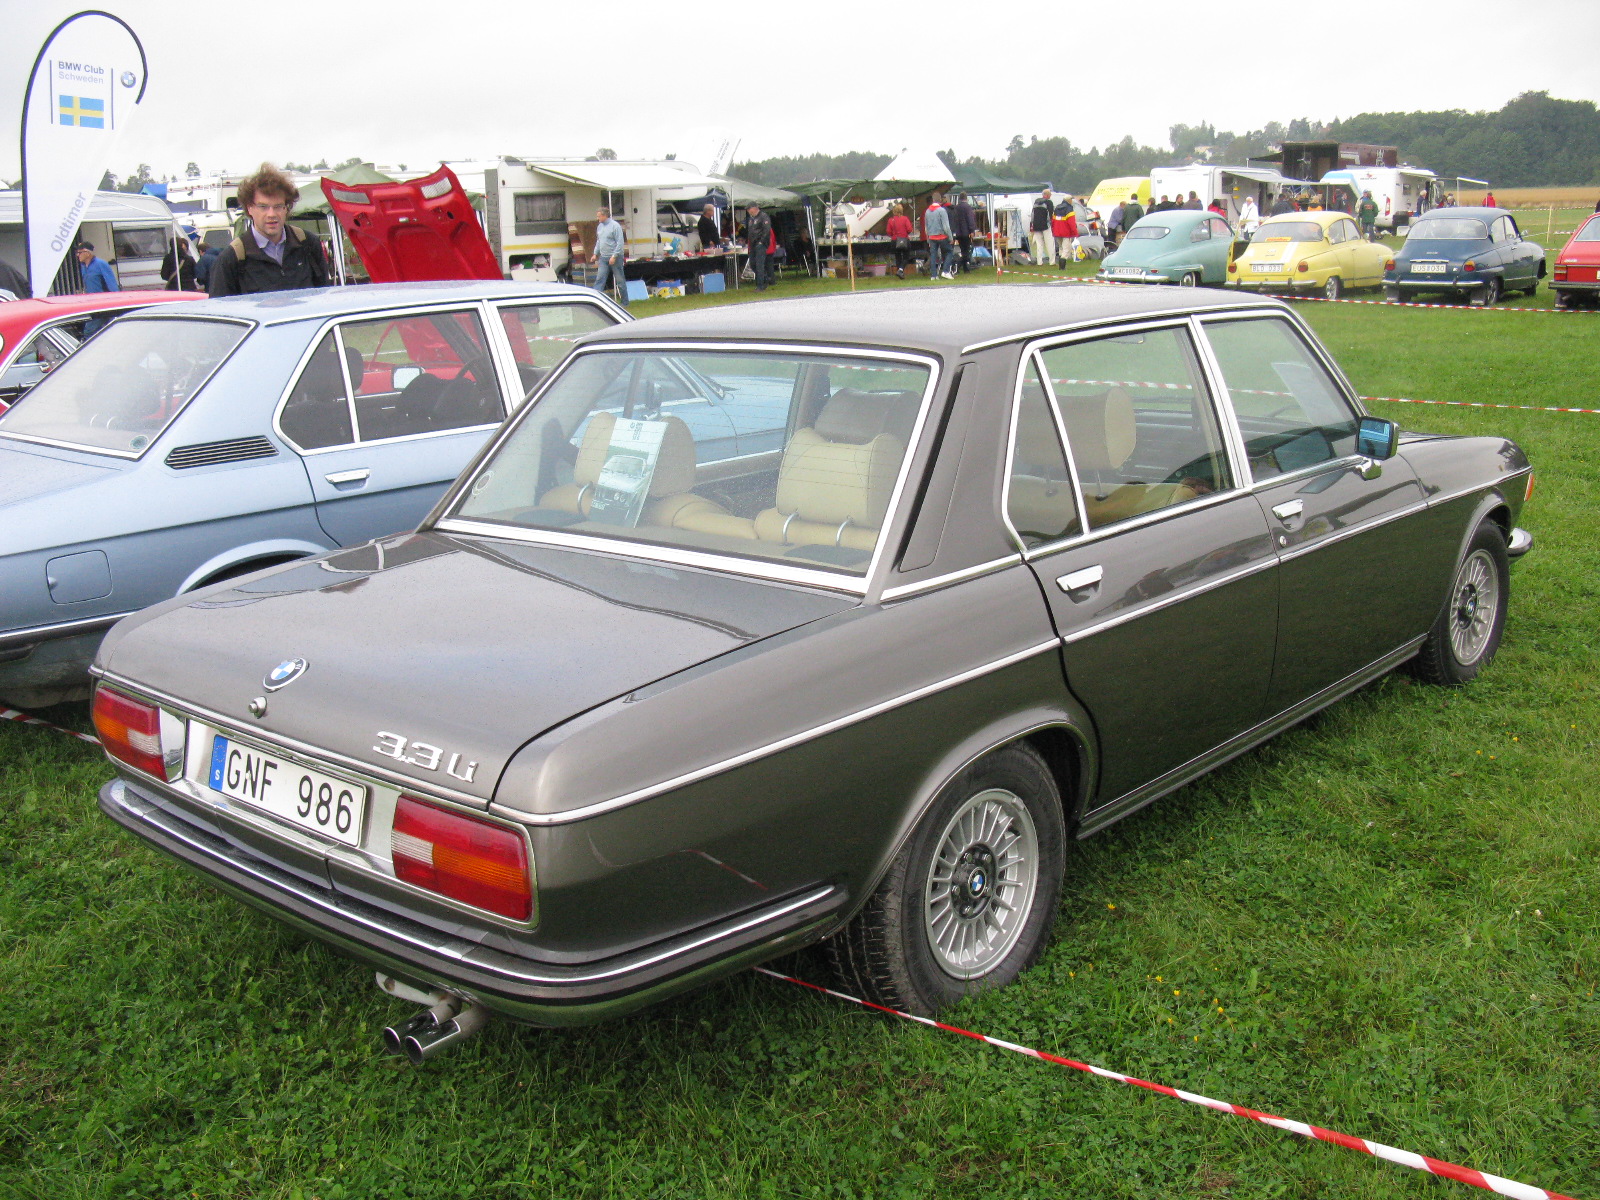 an antique bmw on display in a show